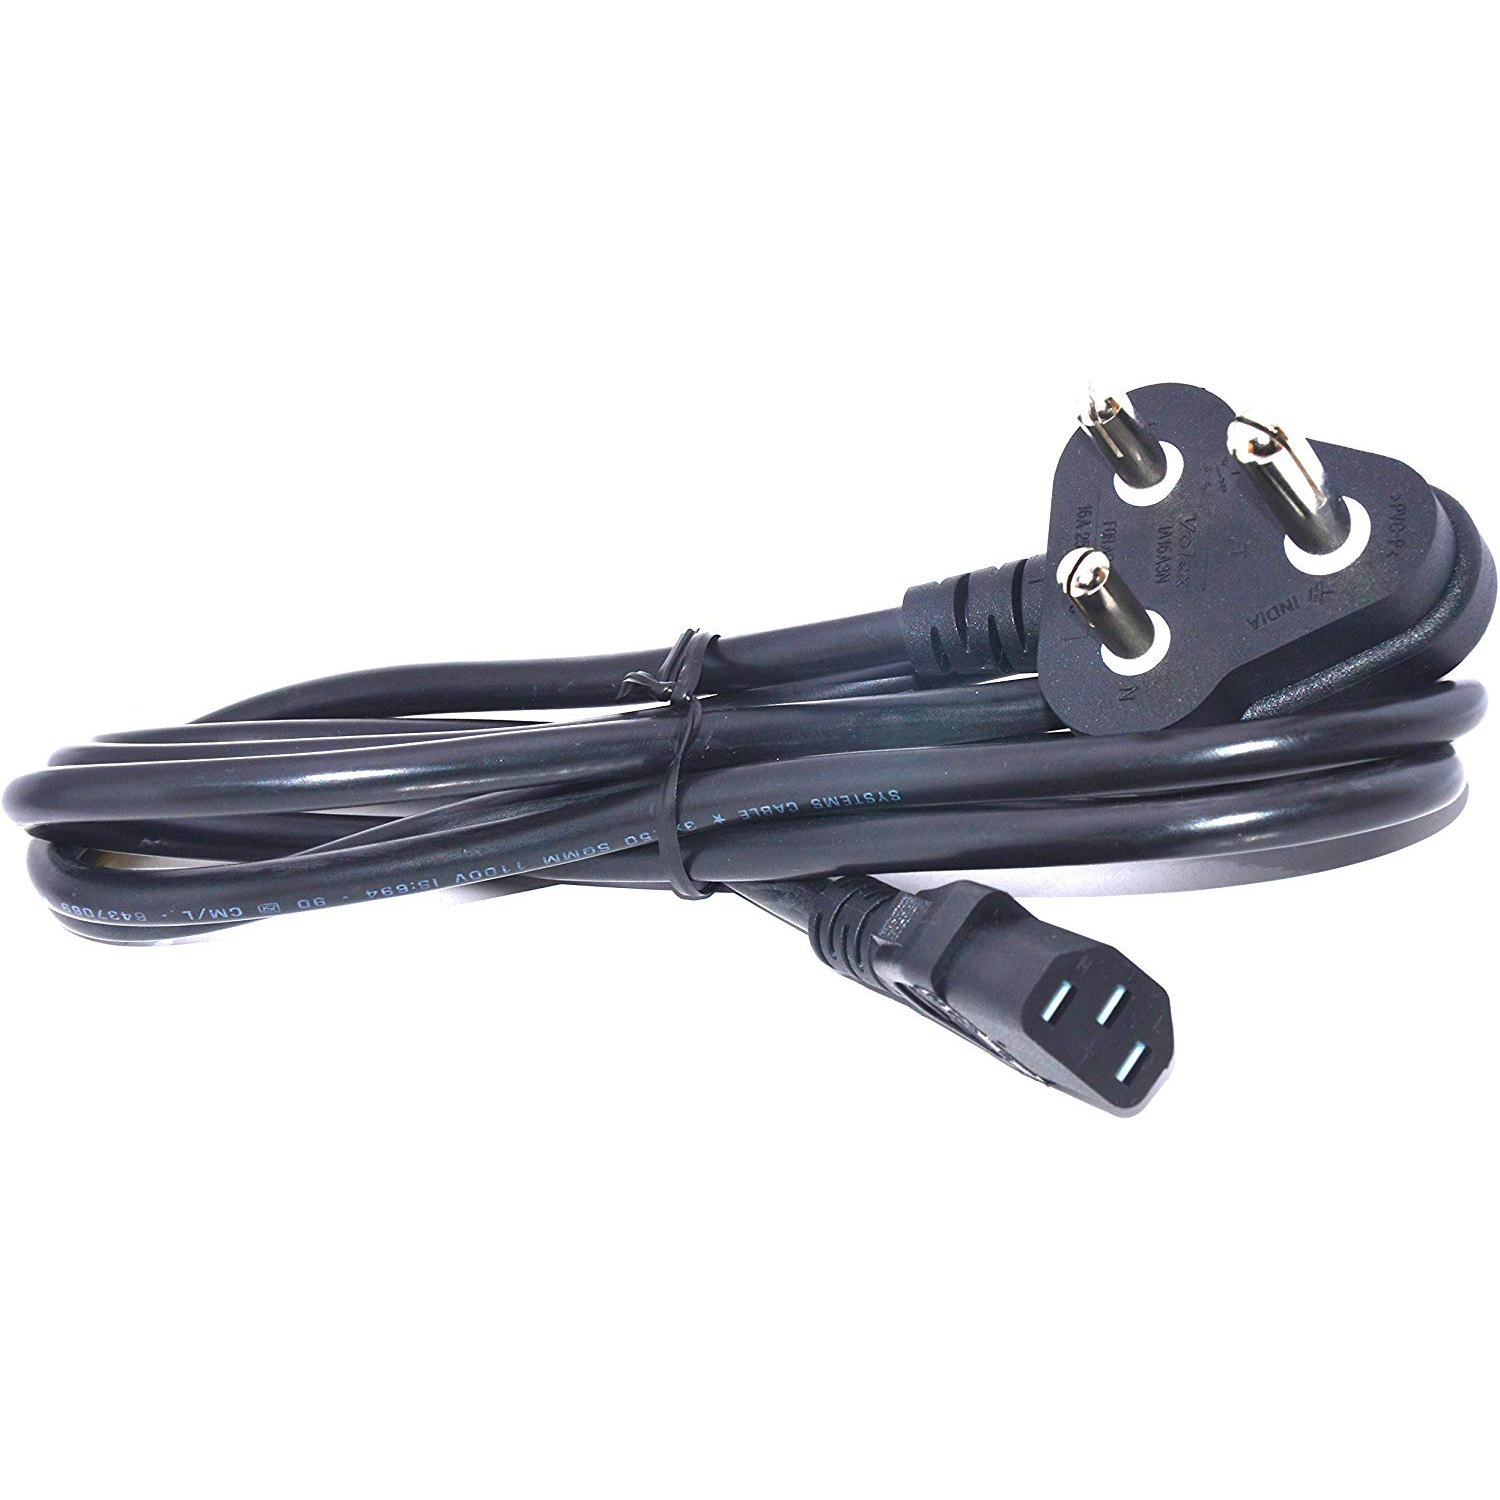 AC Power Cord Cable for HP Laserjet P1005 P1006 P1007 P1008 P1009 P1015 Printers 